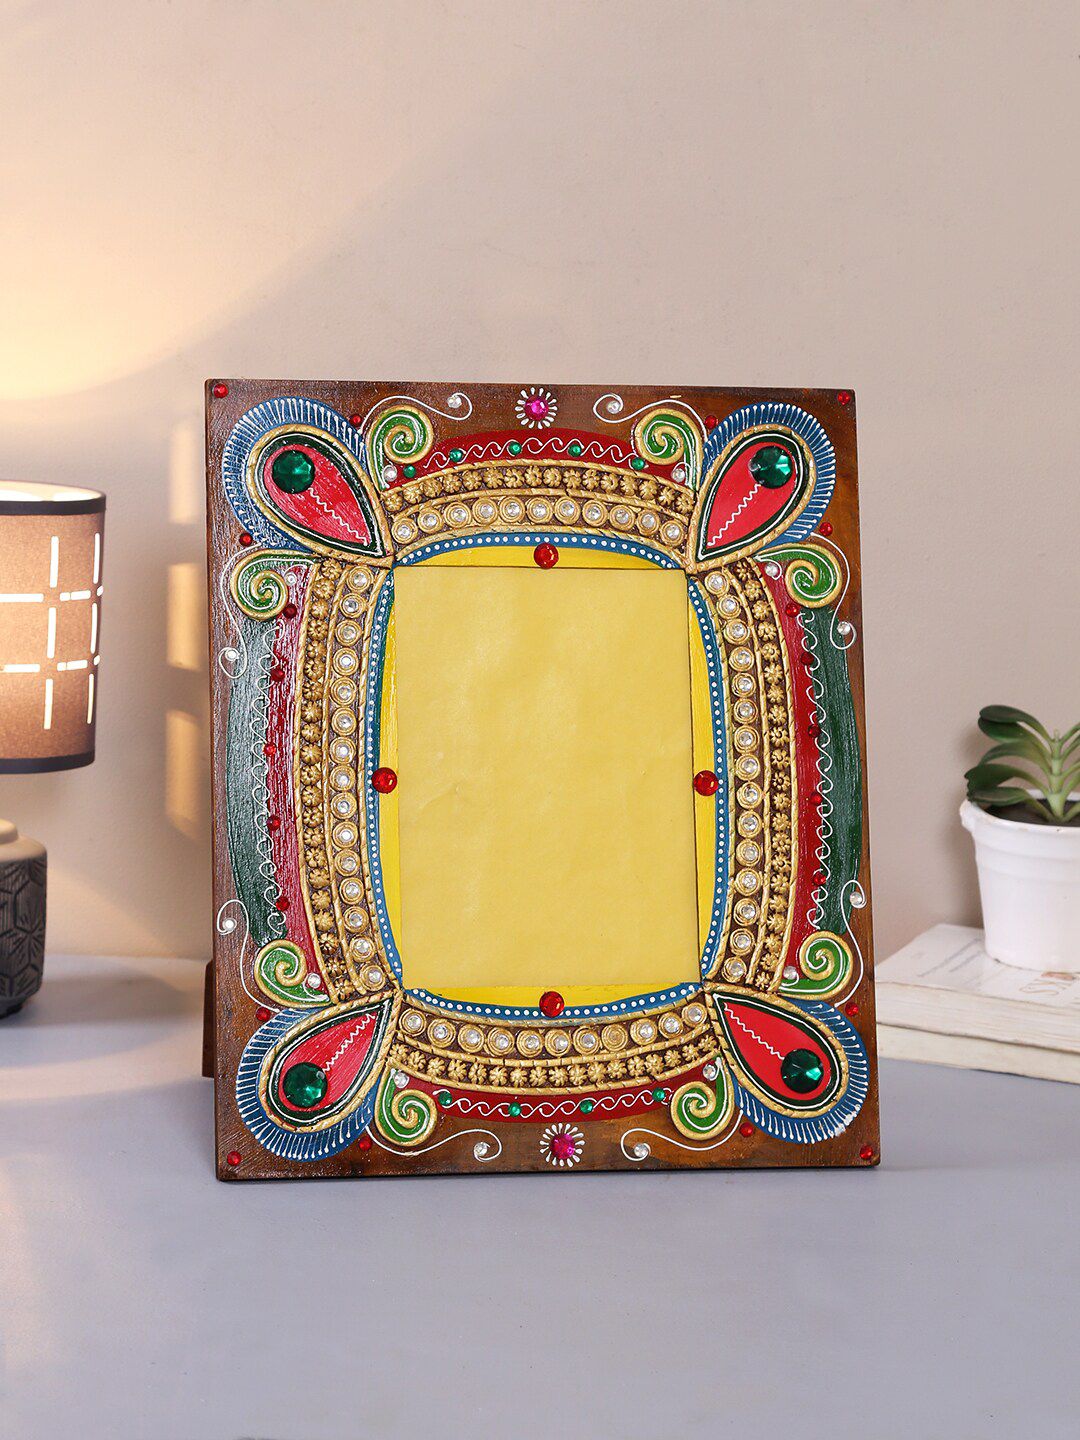 Aapno Rajasthan Brown & Gold-Toned Clay Work Wooden Table-Top Photo Frame Price in India